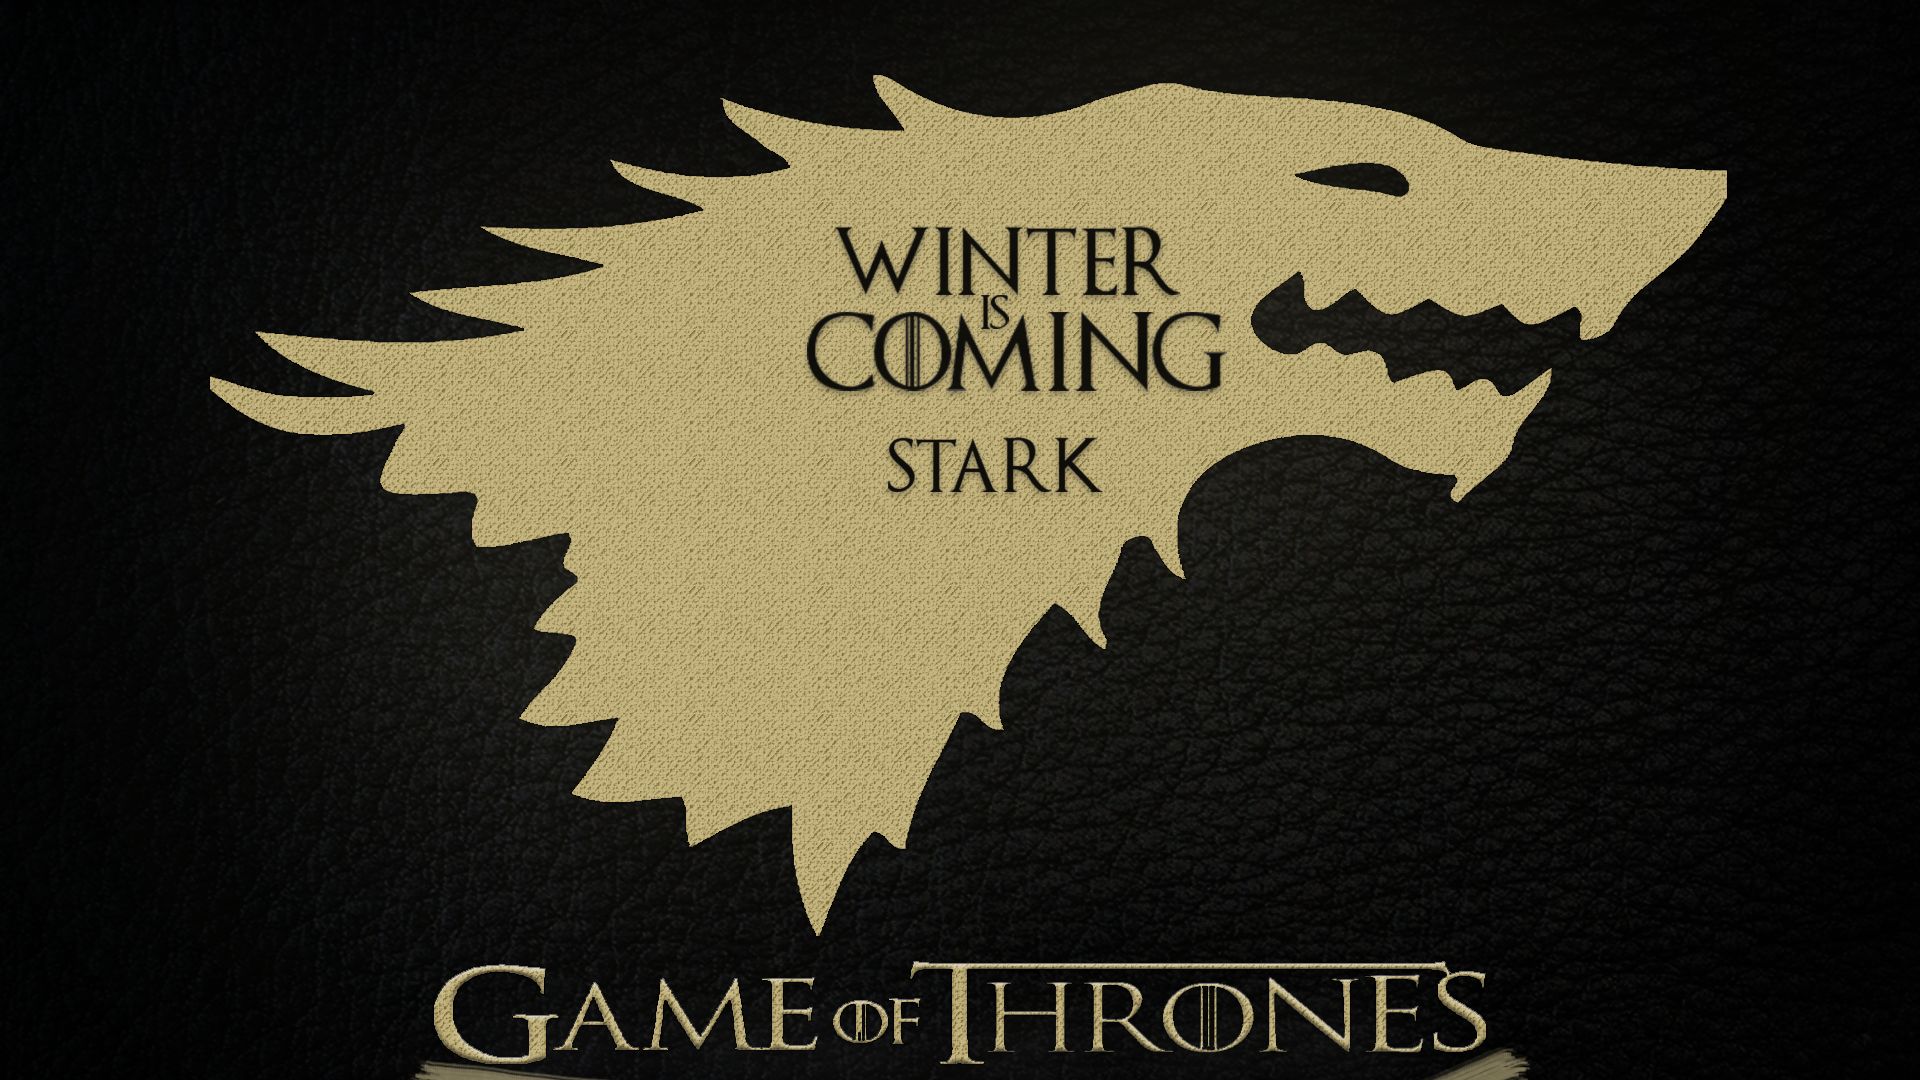 House Stark Wallpapers - Wallpaper Cave